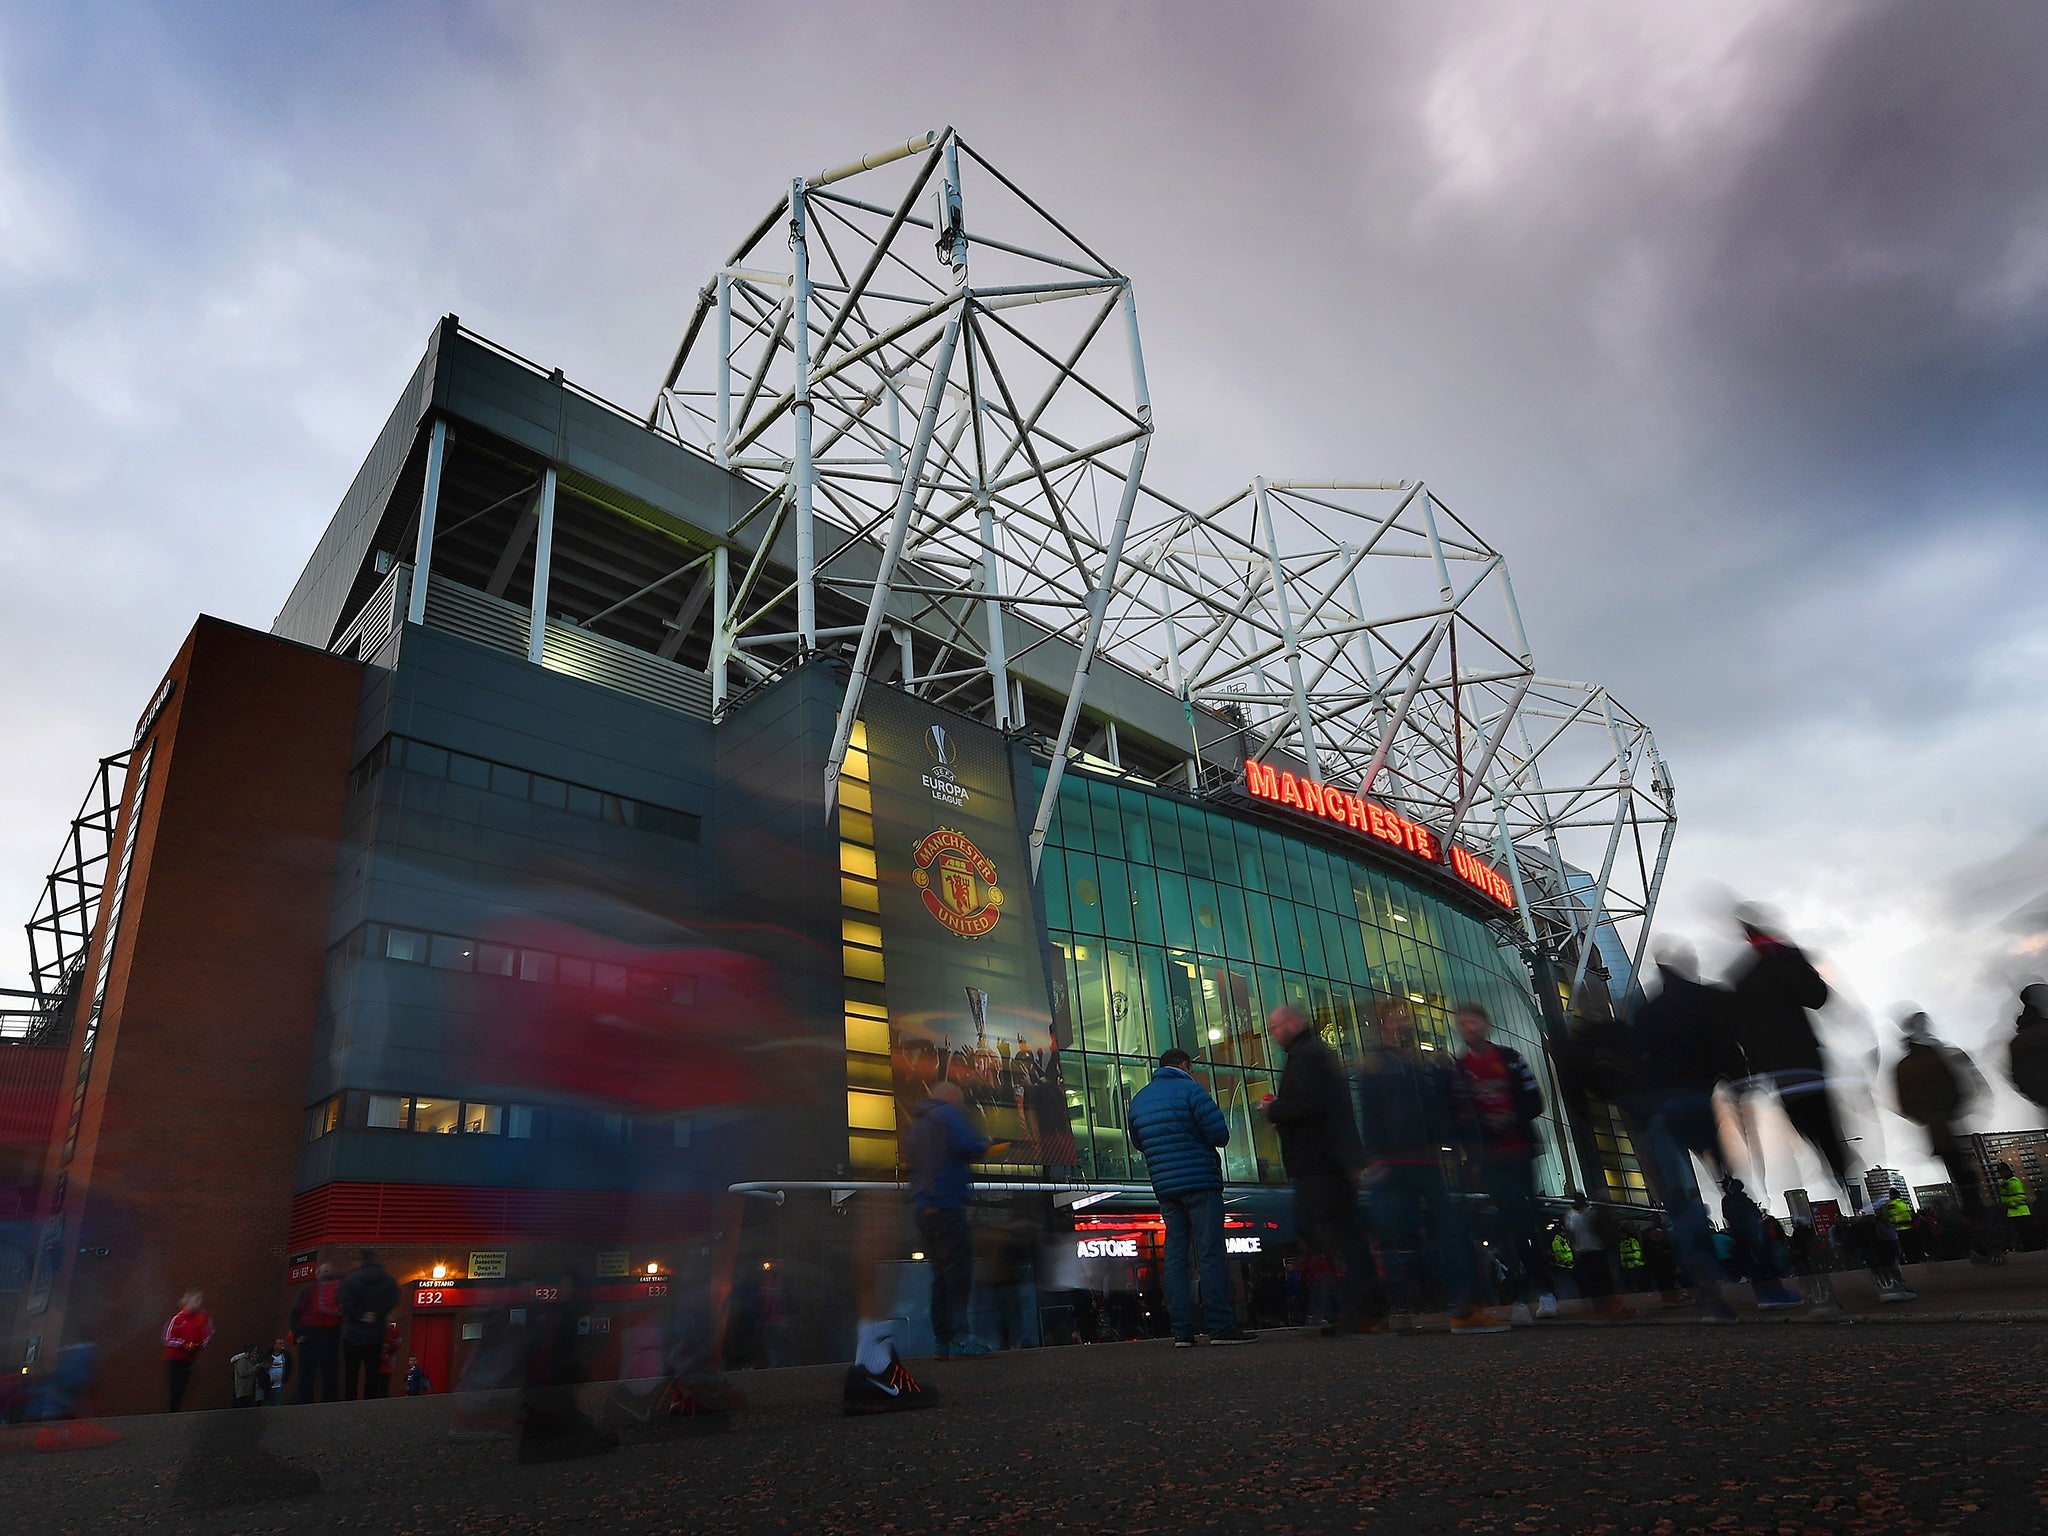 A scene outside Manchester United's ground Old Trafford